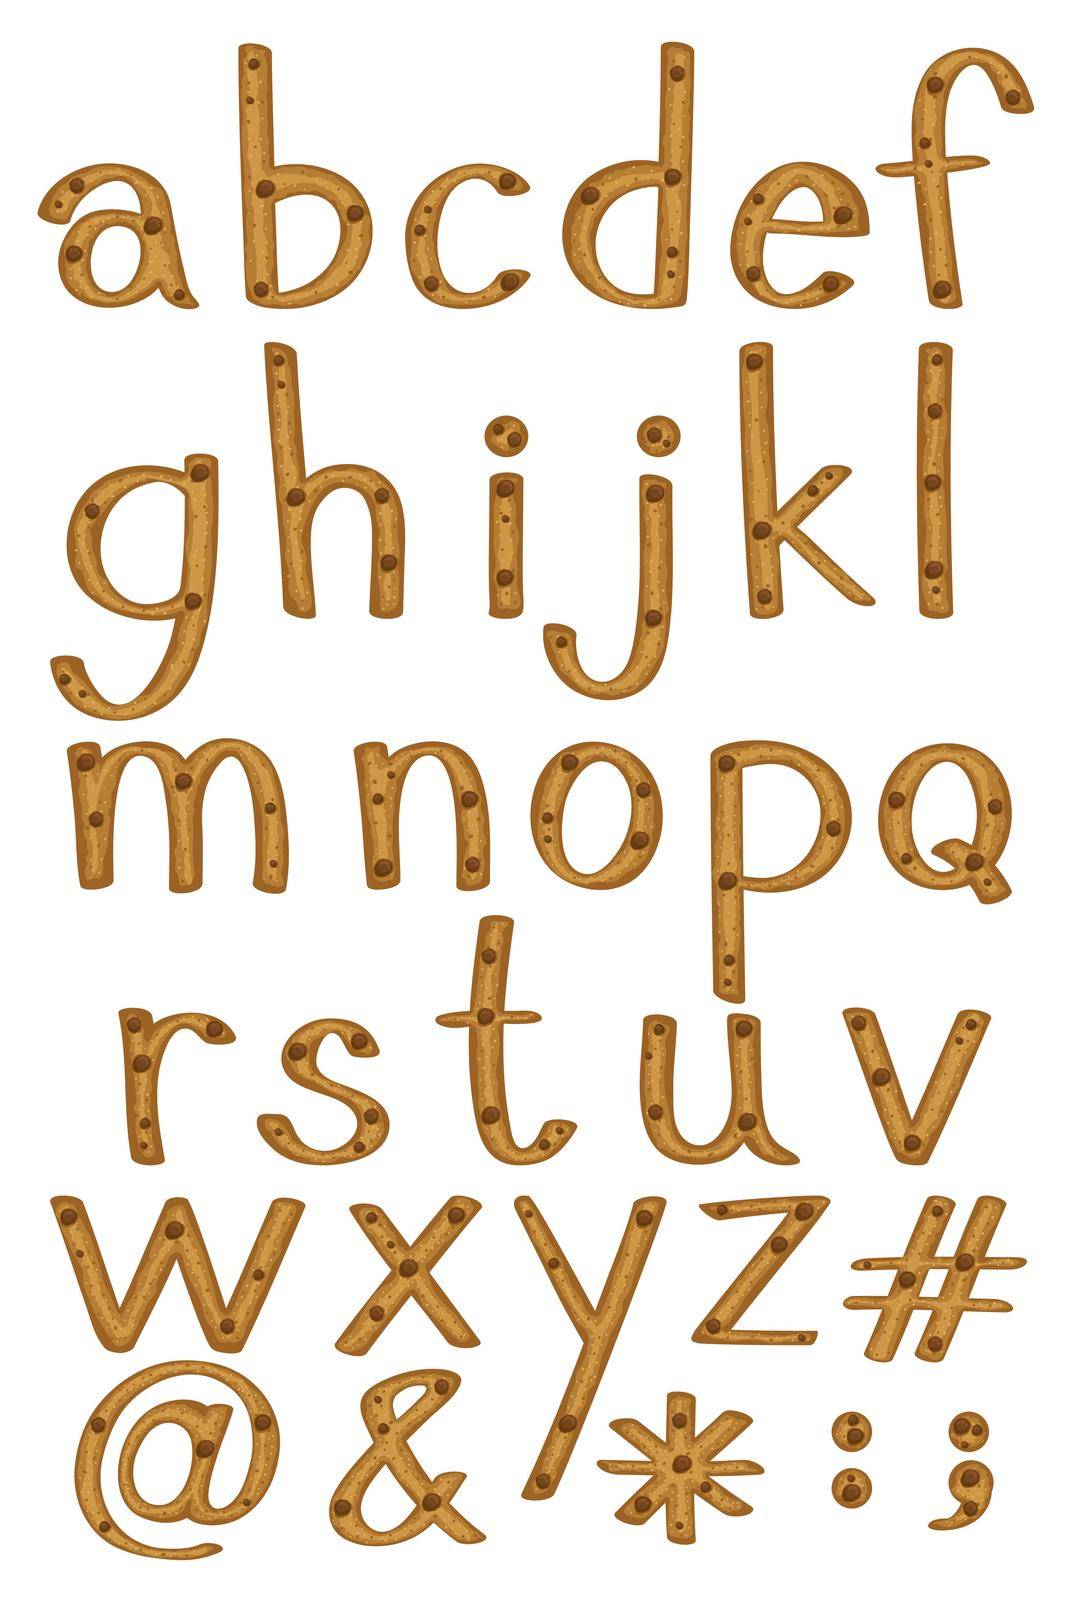 Set of alphabet and symbols in wooden pattern